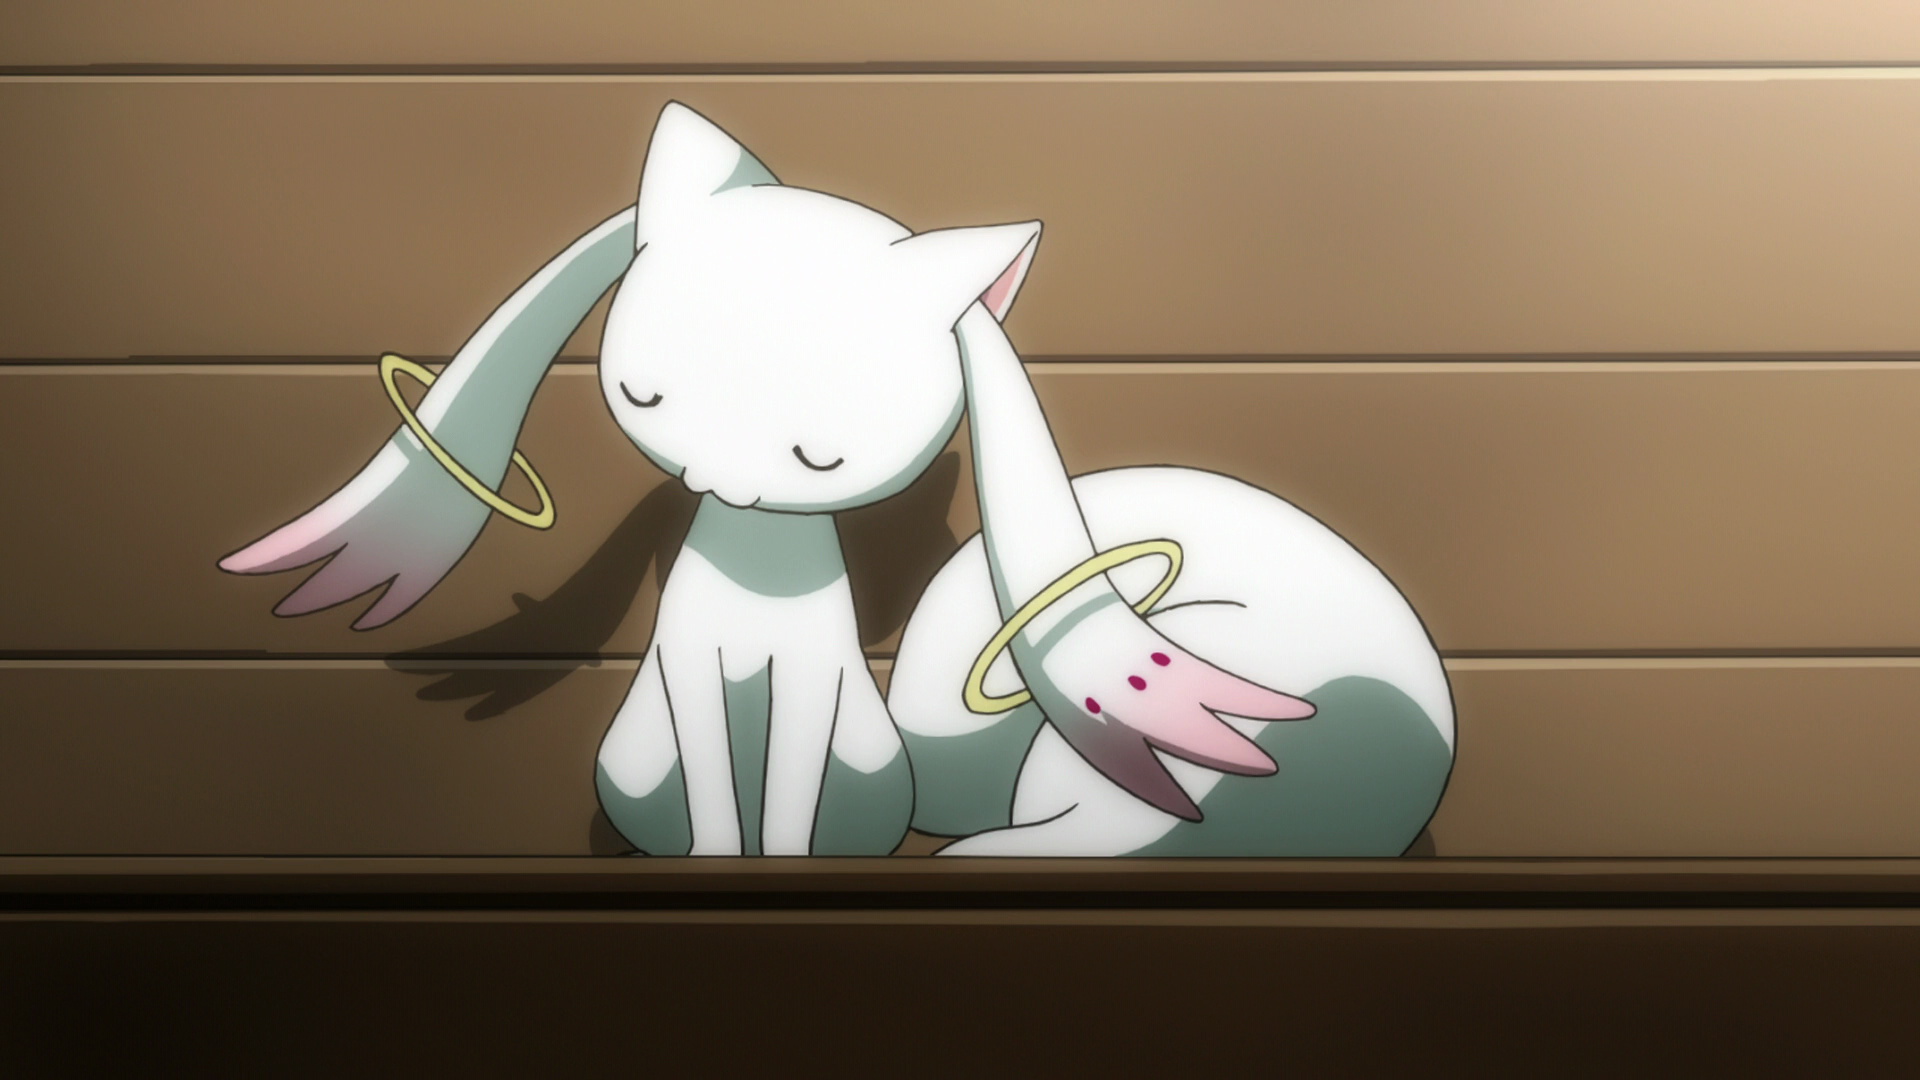 Kyubey, Anime character, Download images, Free, 1920x1080 Full HD Desktop